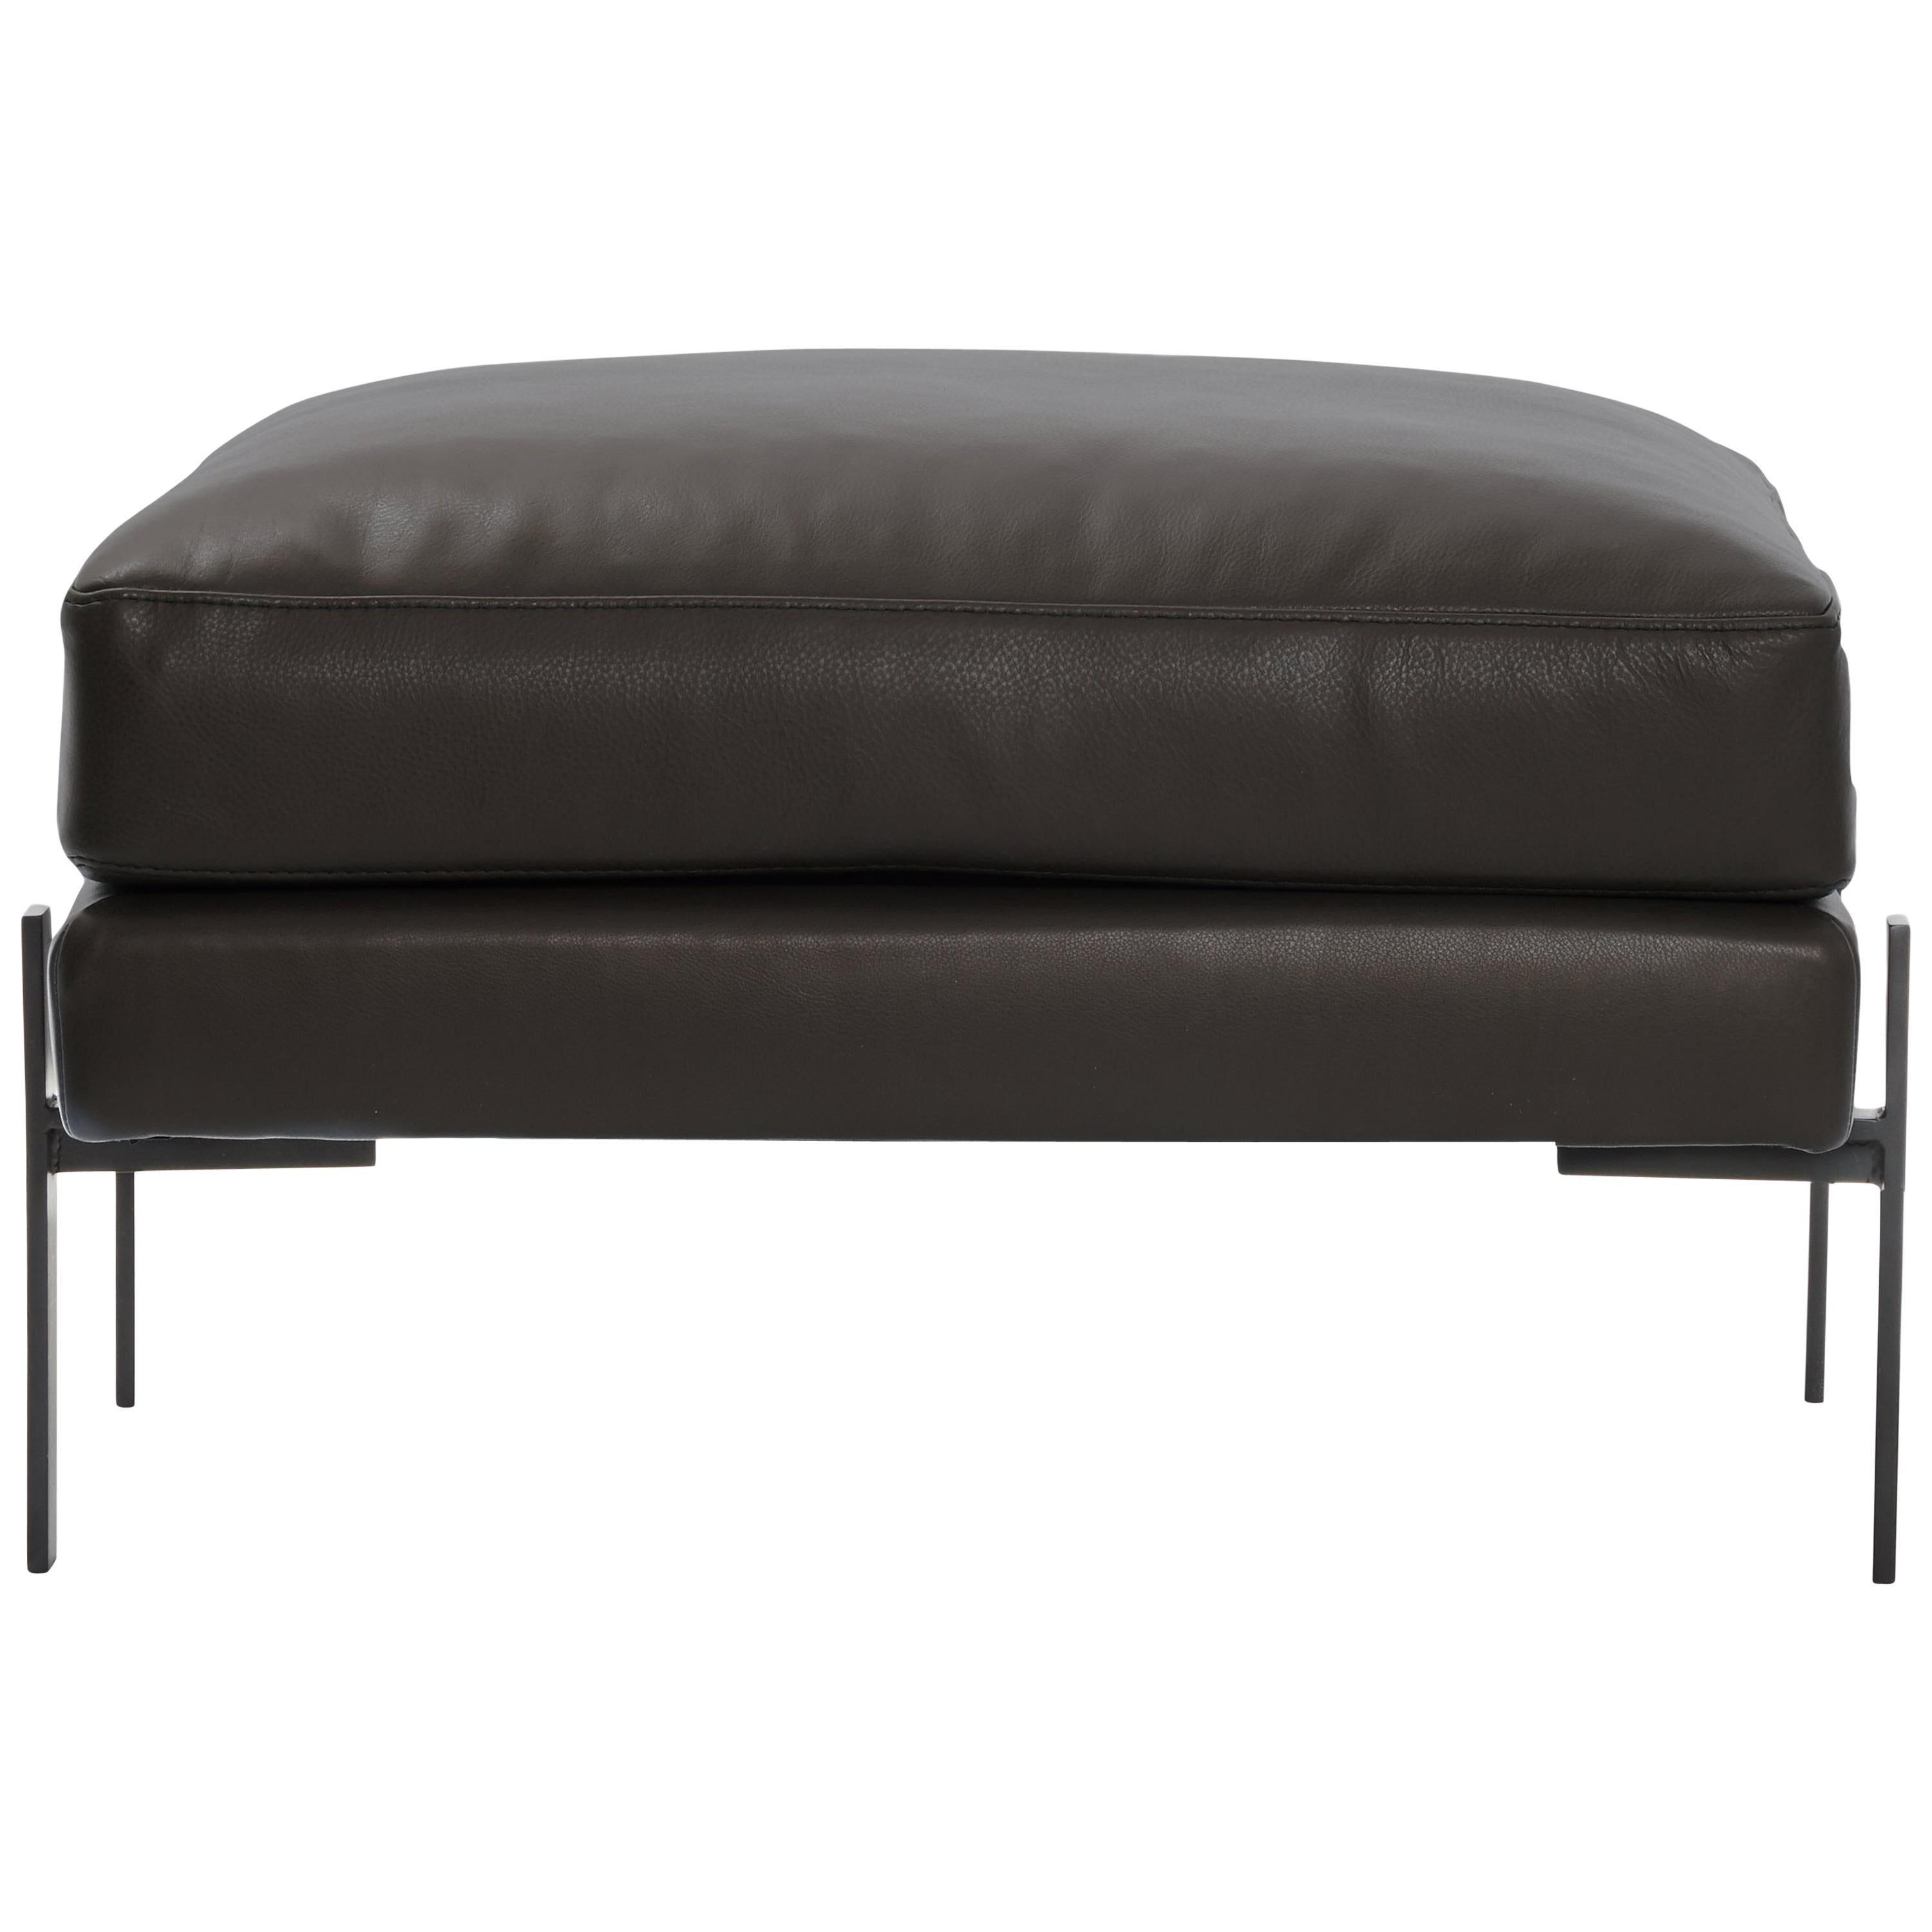 Truss Ottoman in Ebony Leather and Powder-Coated Steel by TRNK For Sale